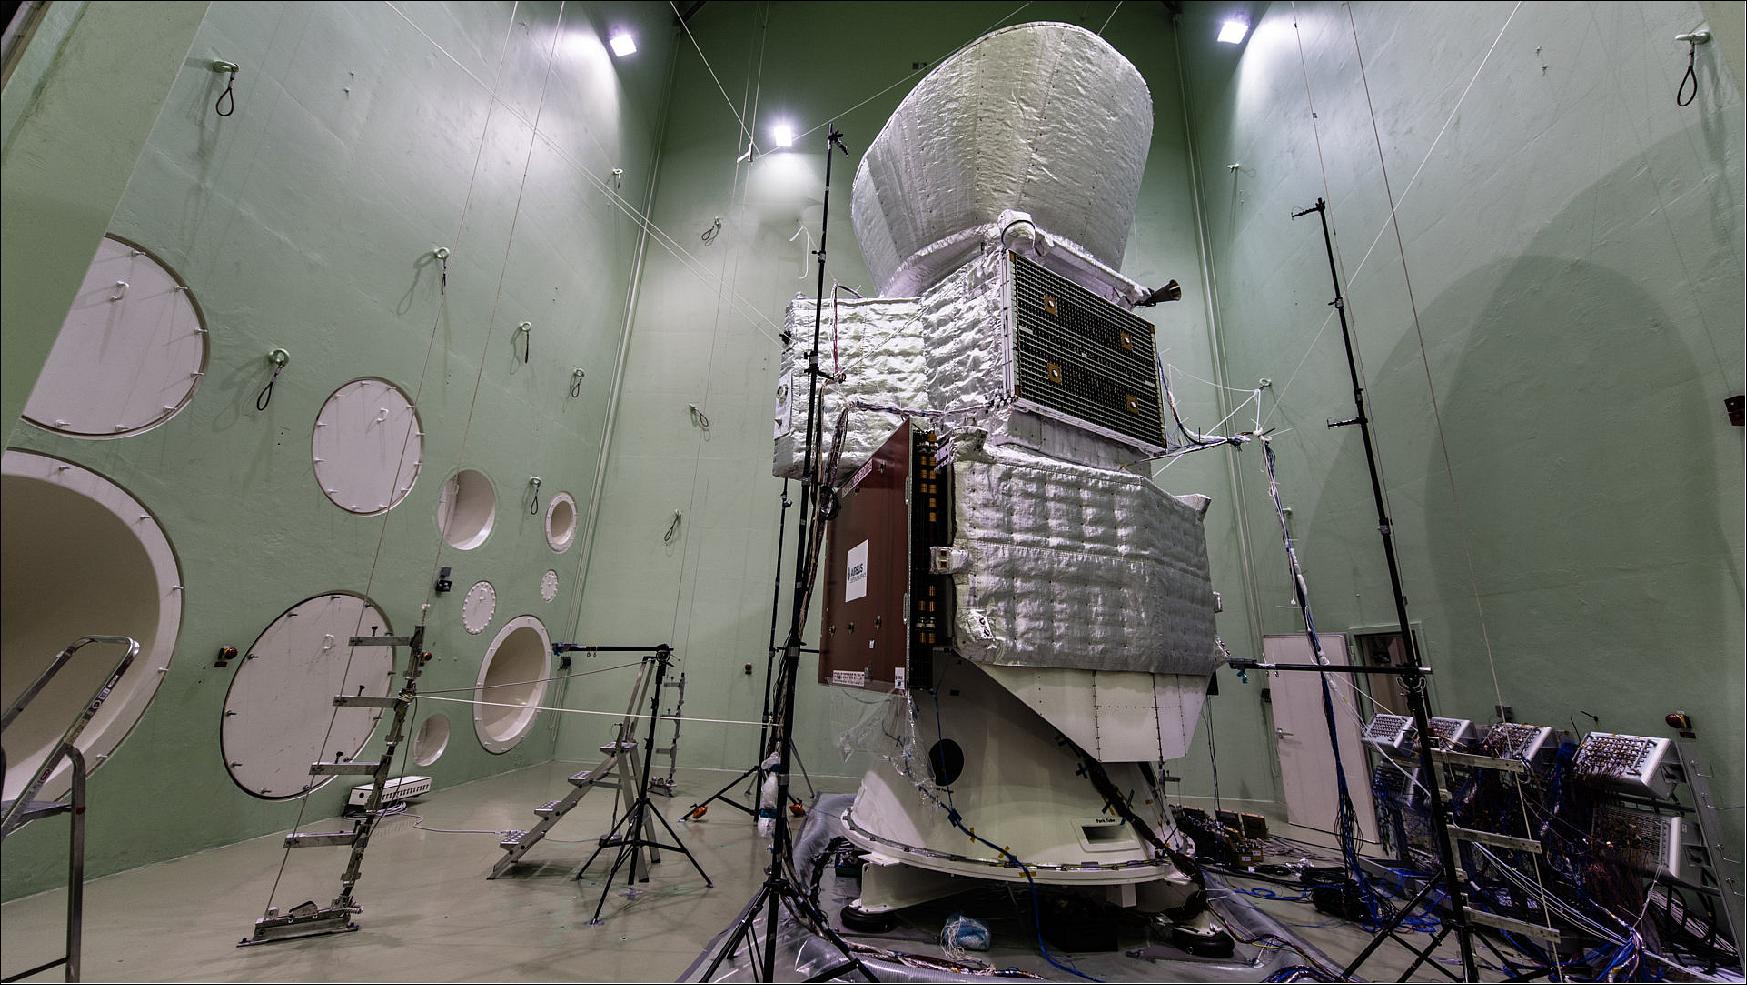 Figure 147: The full BepiColombo stack seen in the Large European Acoustic Facility (LEAF) at ESA/ESTEC in June 2017. The walls of the chamber are fitted with powerful speakers that reproduce the noise during launch (image credit: ESA–C. Carreau, CC BY-SA 3.0 IGO) 143)